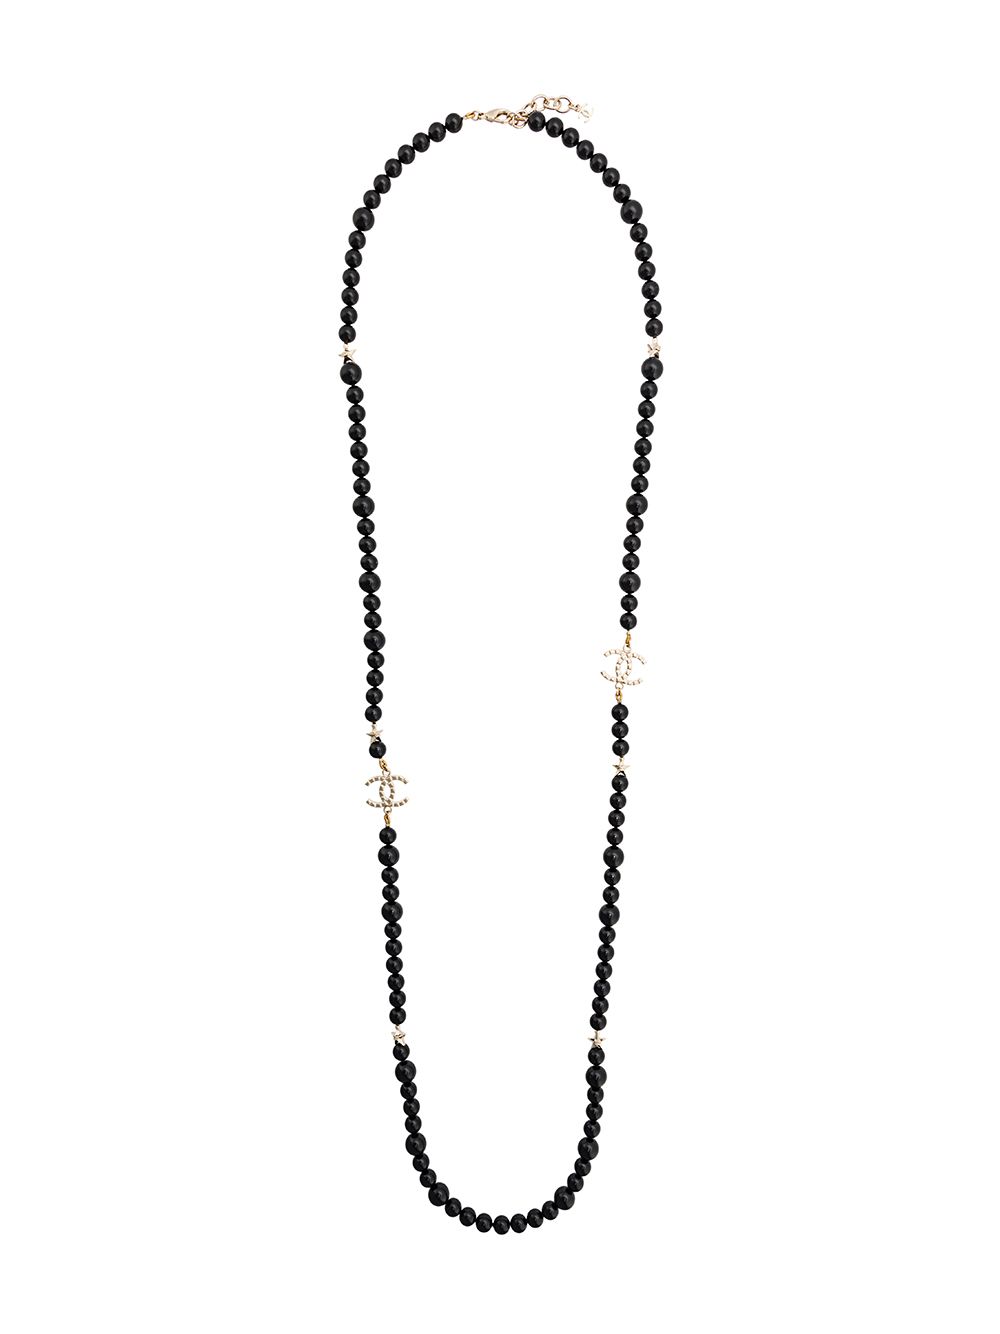 CHANEL Pre-Owned CC Logo Beaded Necklace - Farfetch